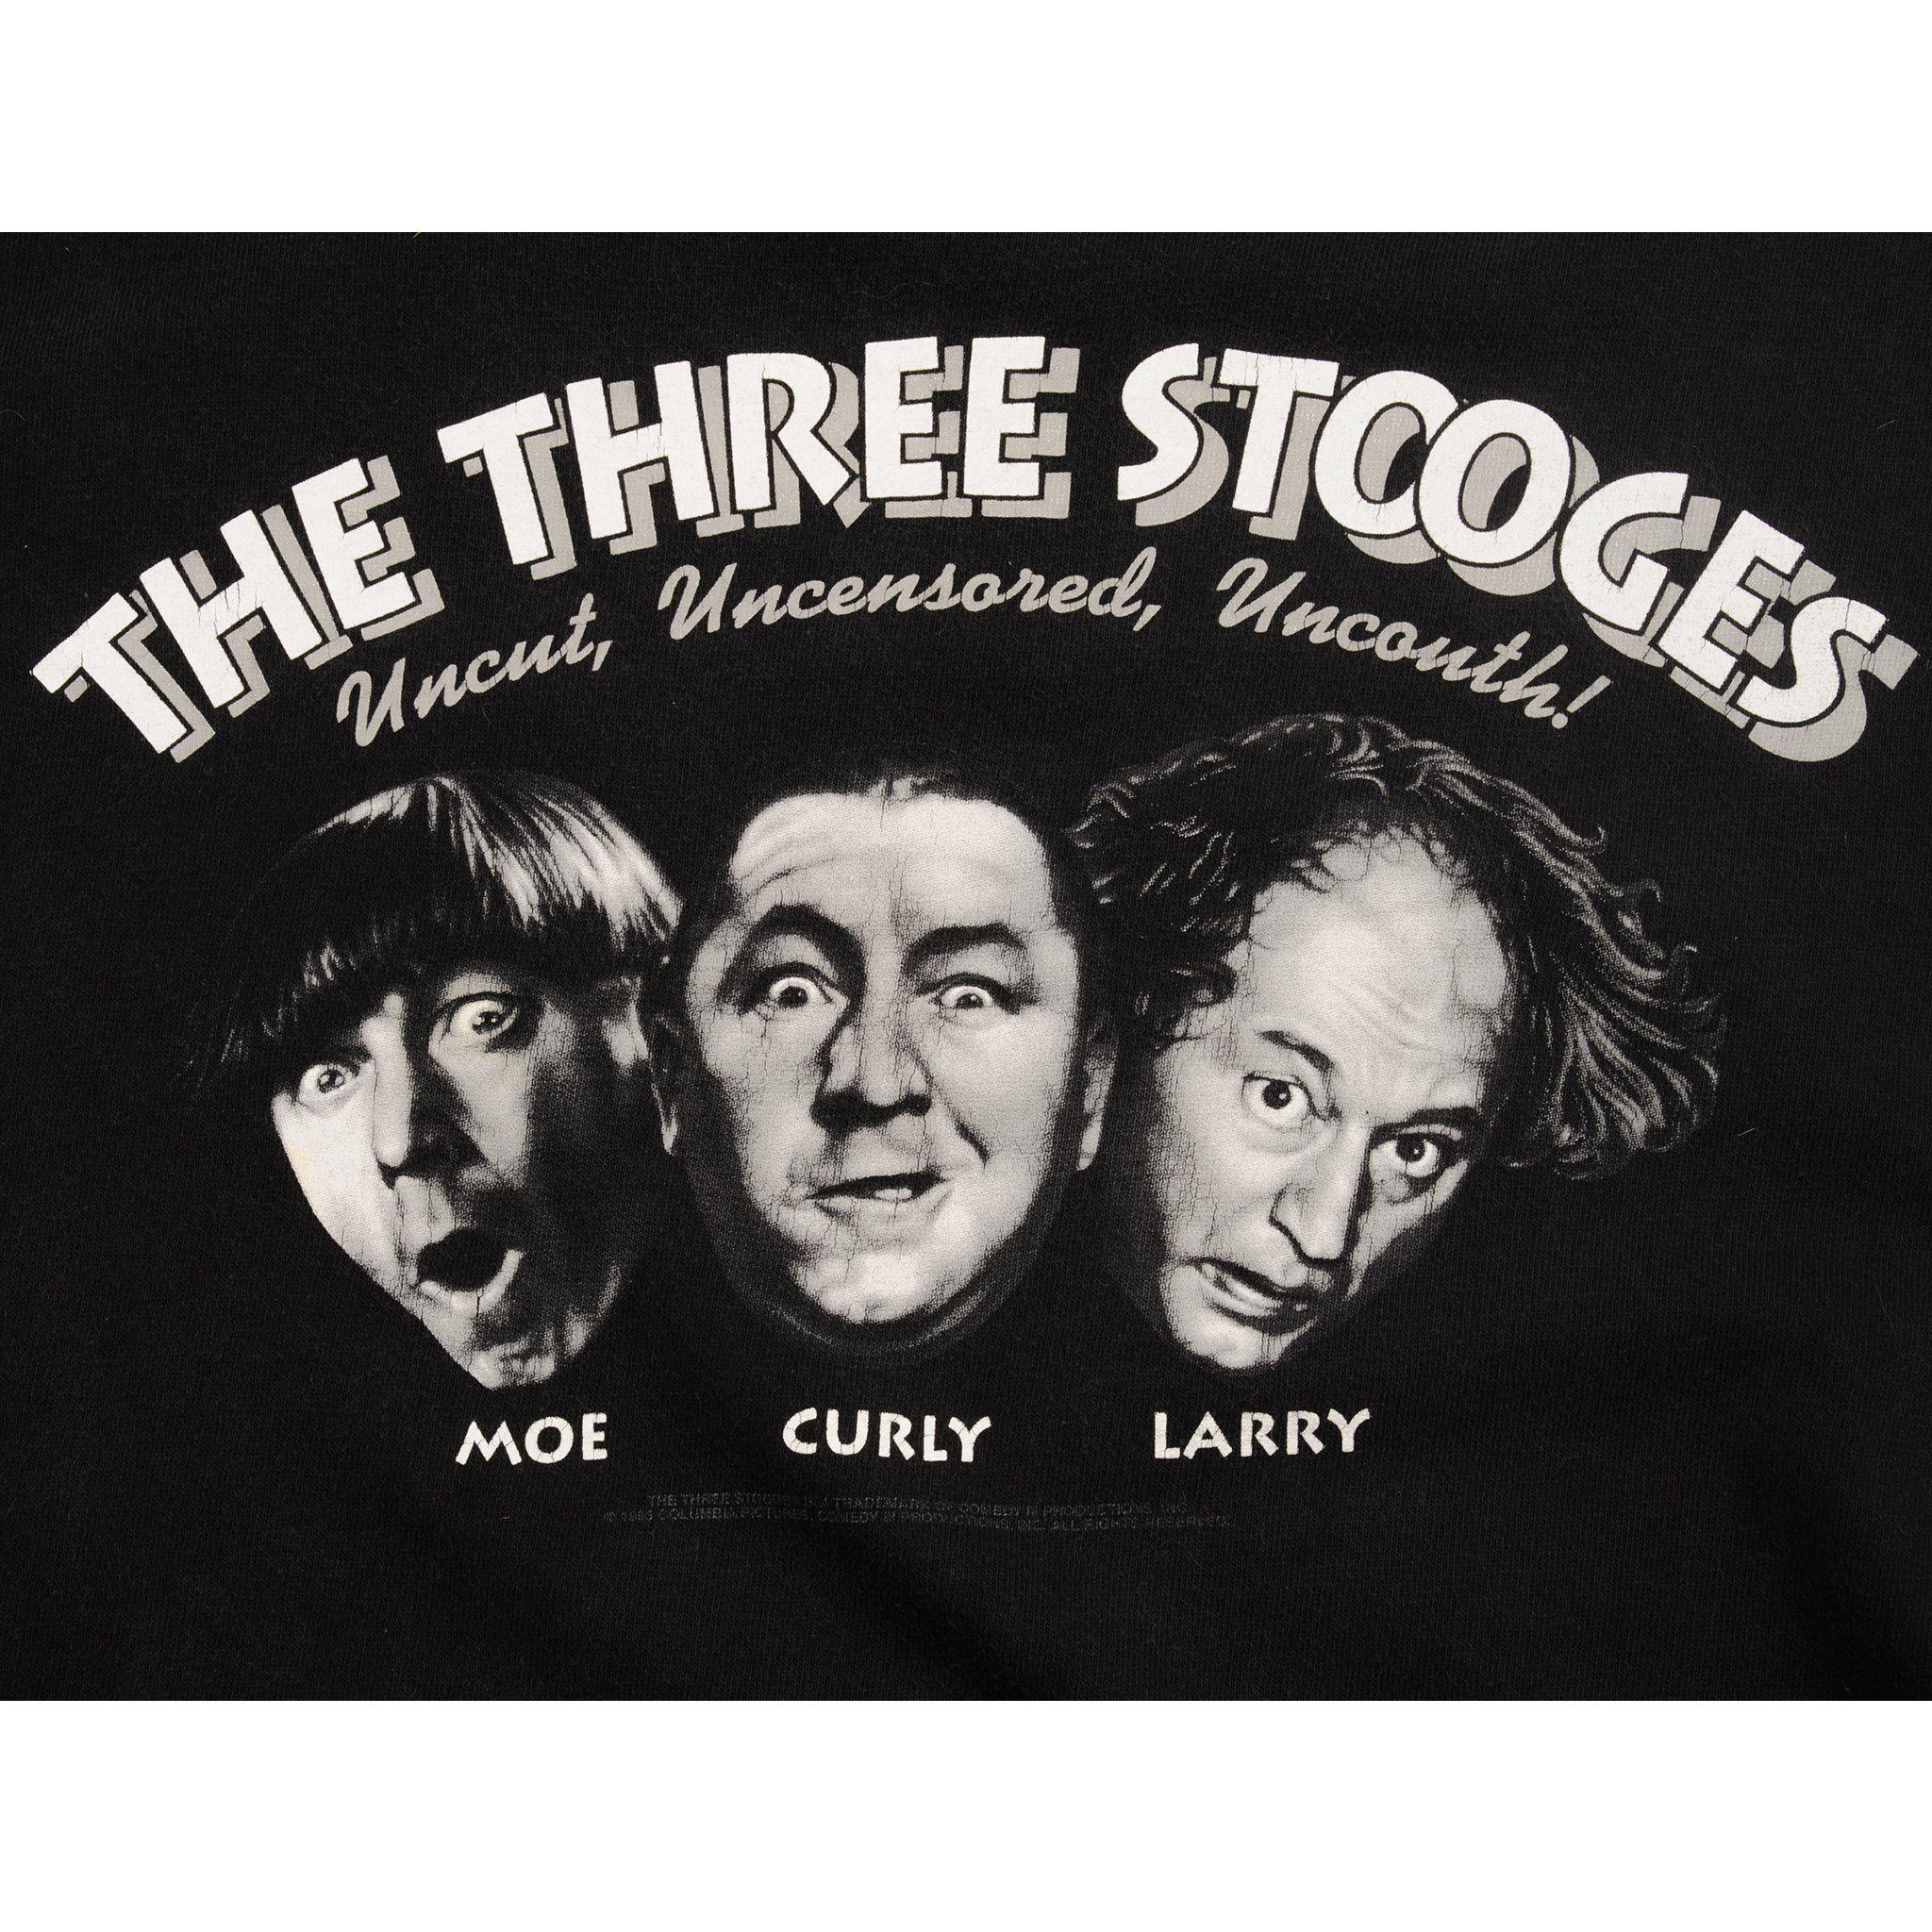 VINTAGE THE THREE STOOGES TEE SHIRT 1995 SIZE XL MADE IN USA